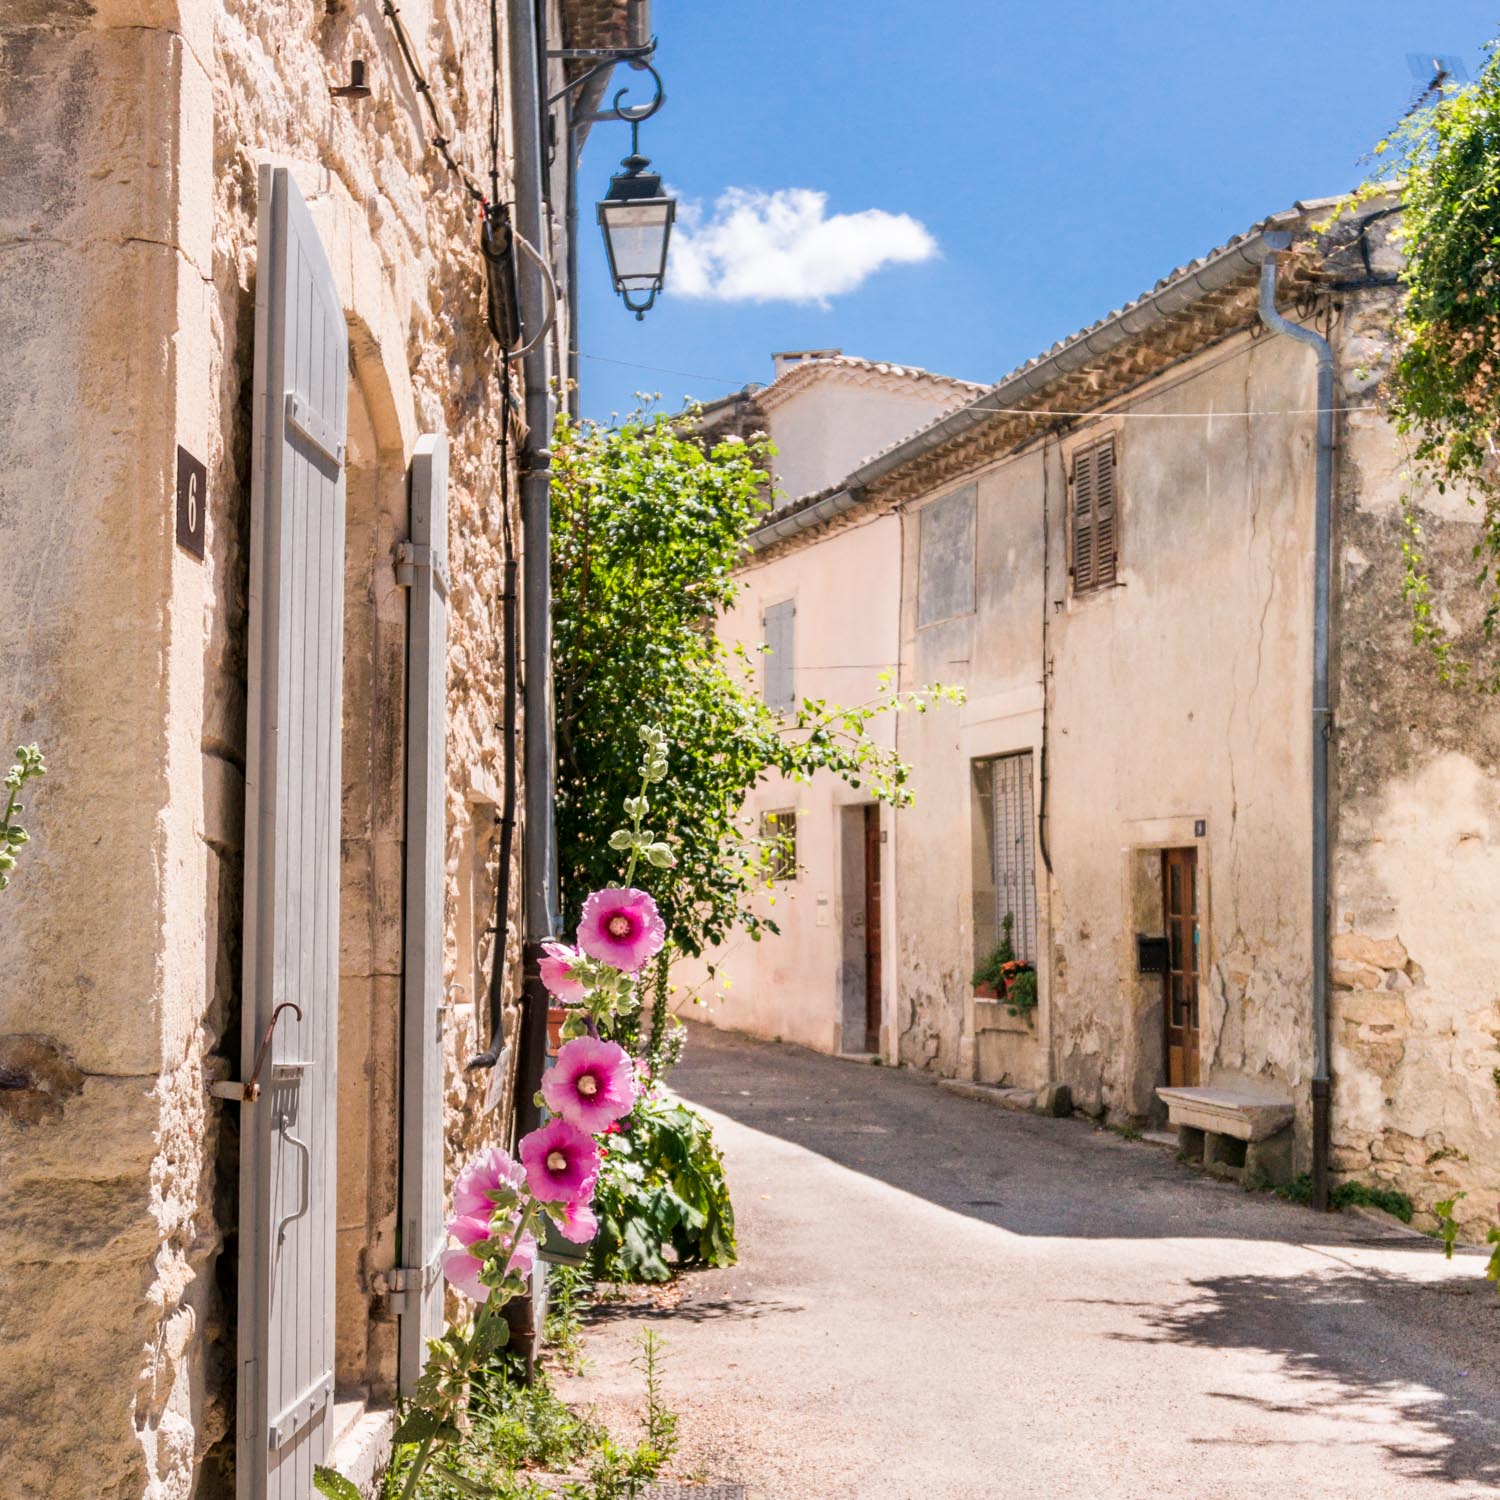 A month in France – Grignan and camping in a vineyard